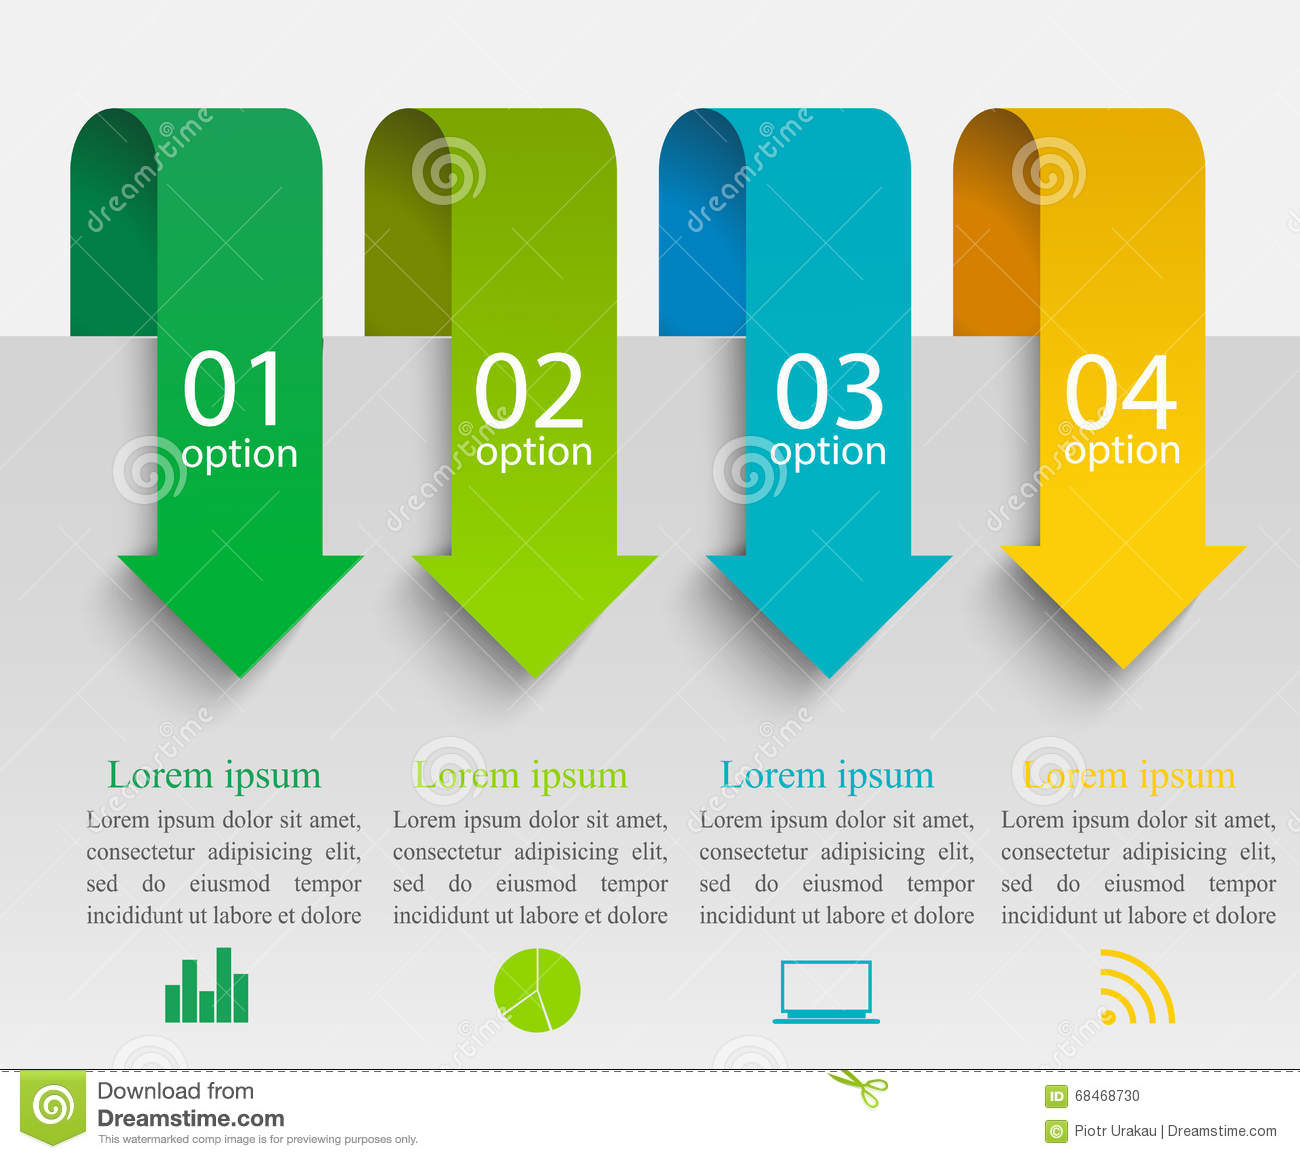 Arrow Direction Infographic Template Stock Illustration - Download Image Now - iStock